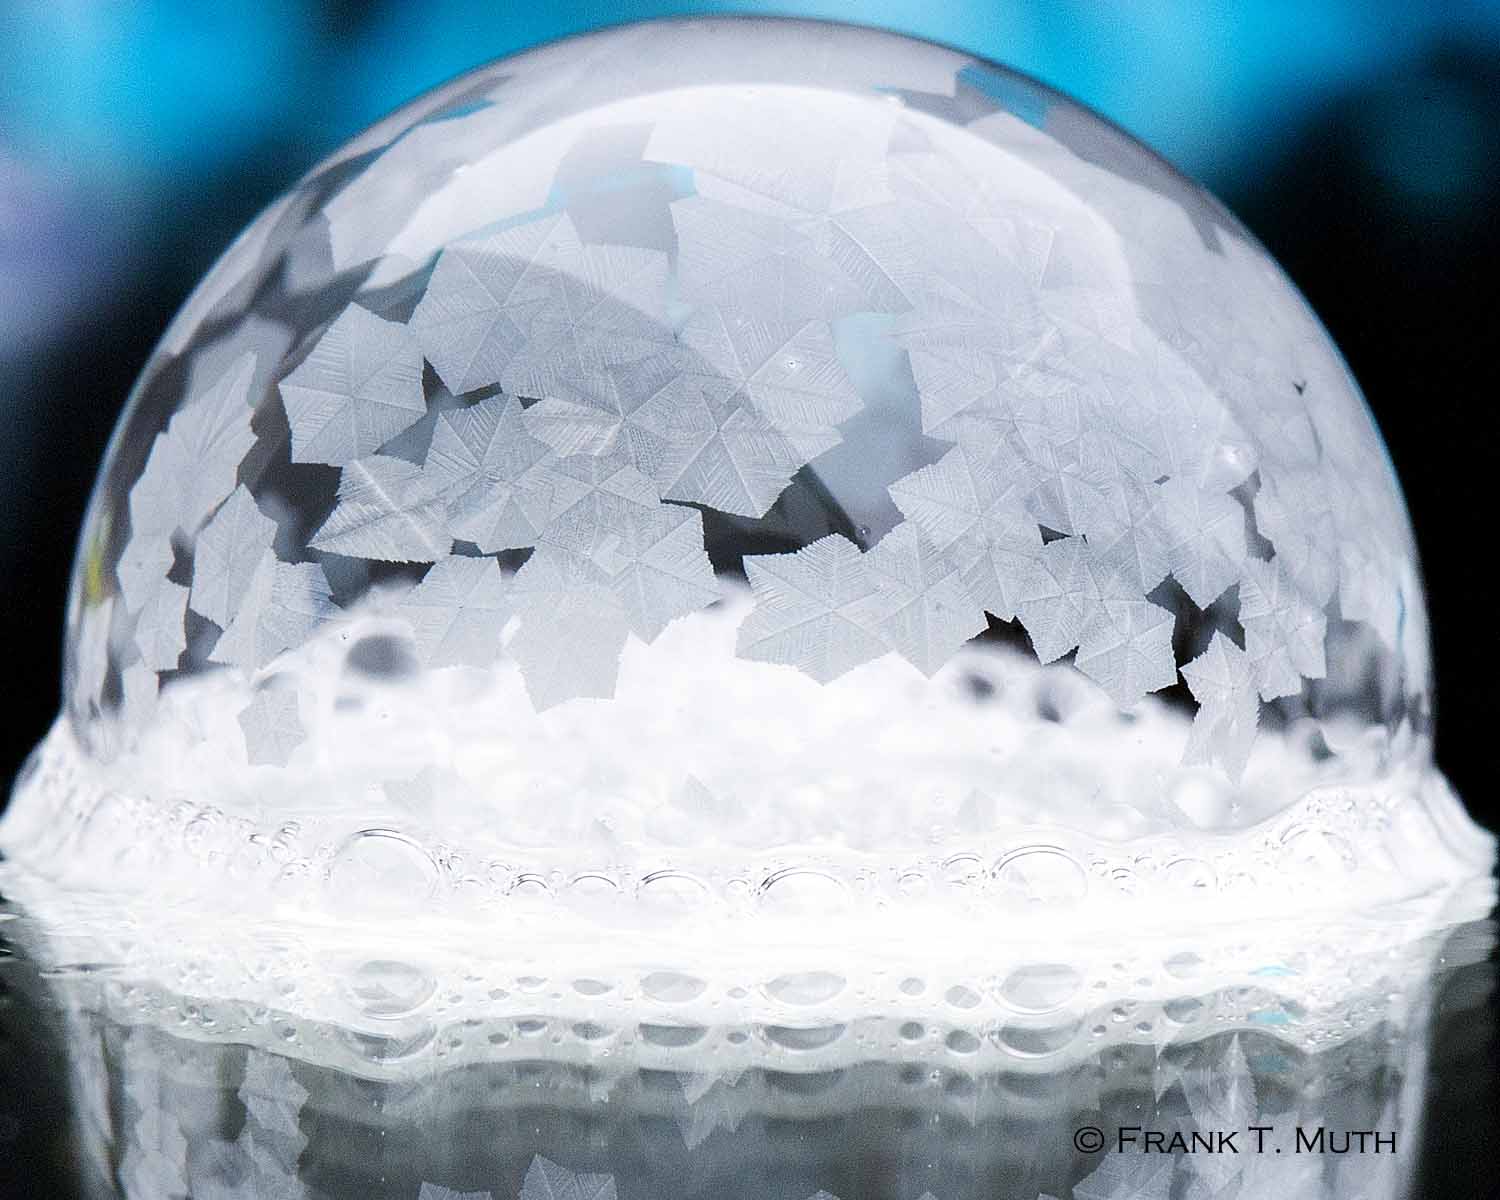 We asked for your best photos of frozen soap bubbles—and wow, did you deliver